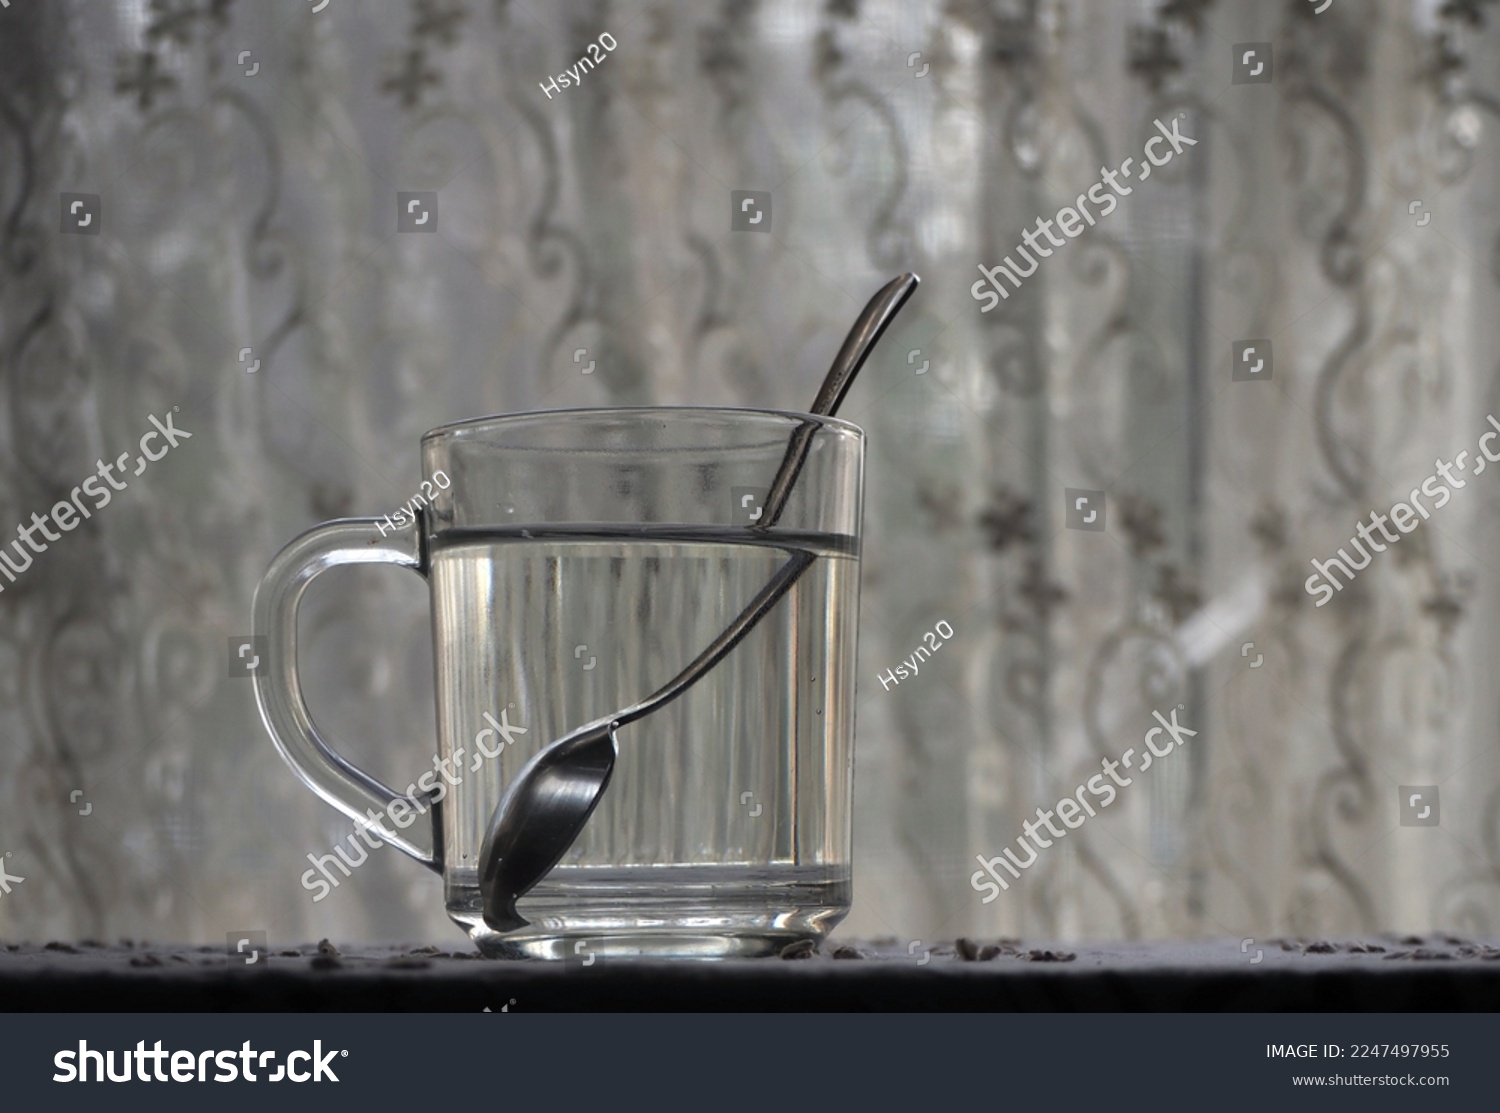 Refraction of the light. Tea spoon inside a glass of water, light refraction.       #2247497955